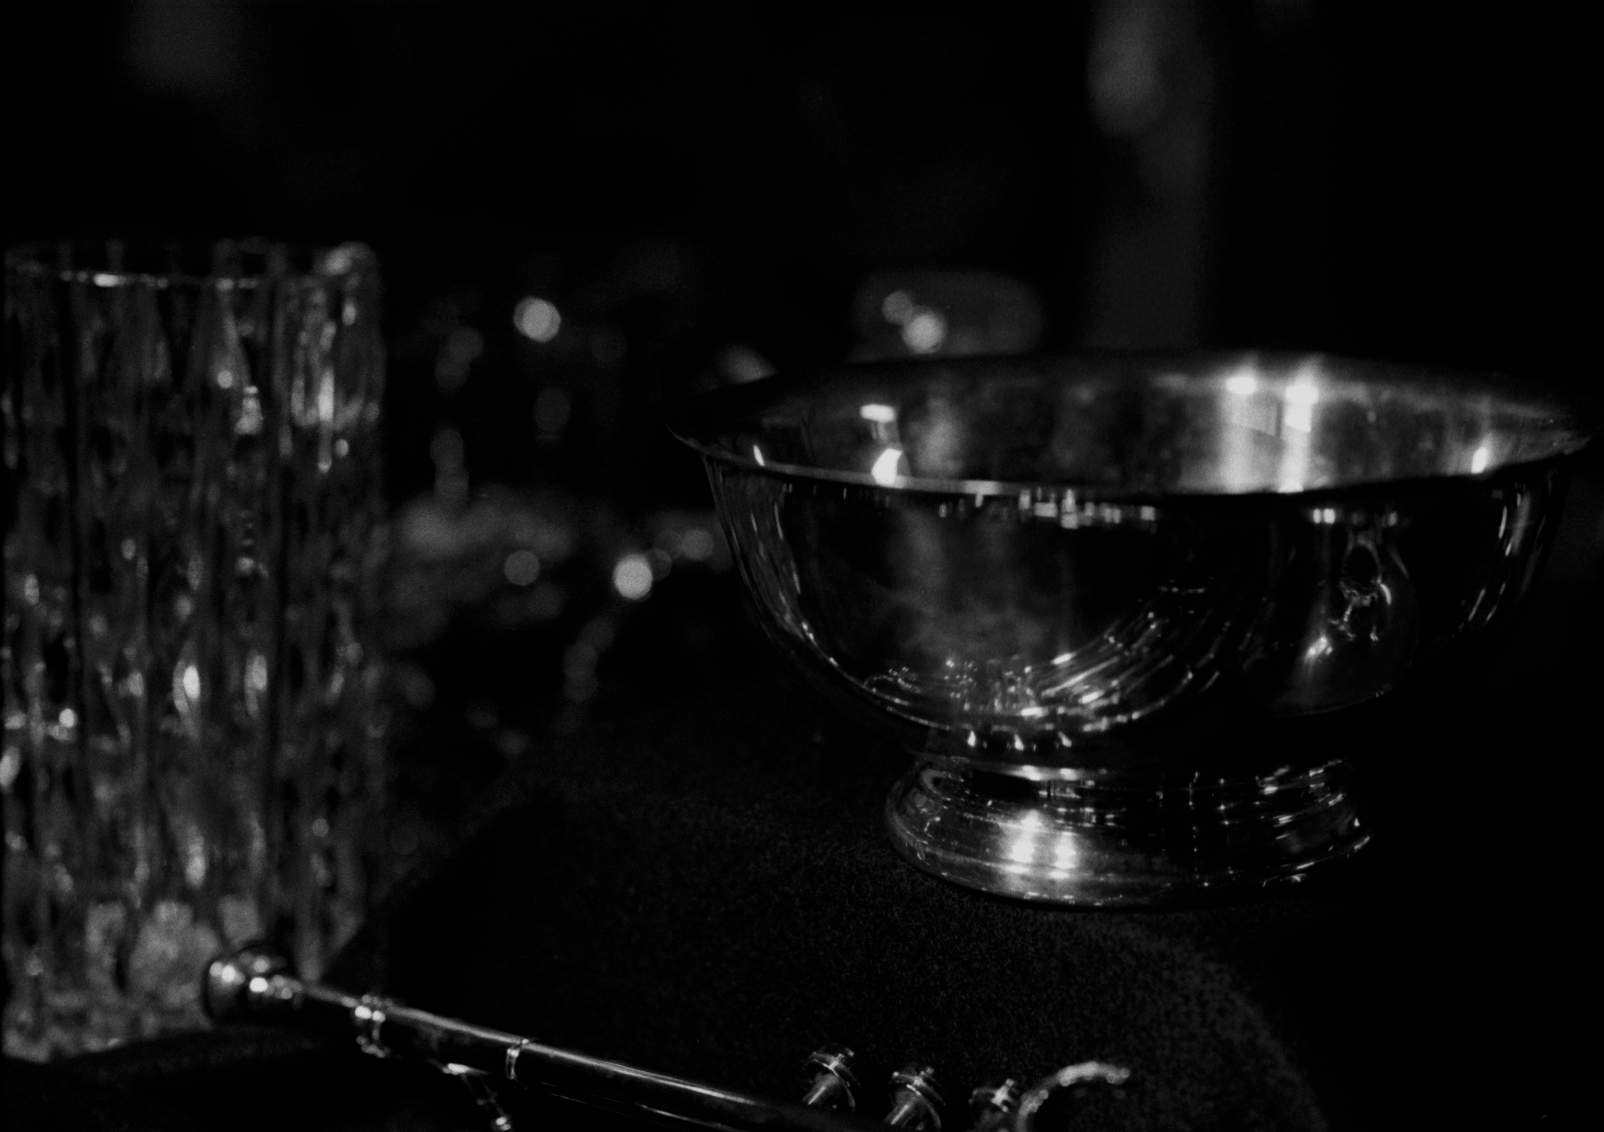 a bowl and a glass cup on a table